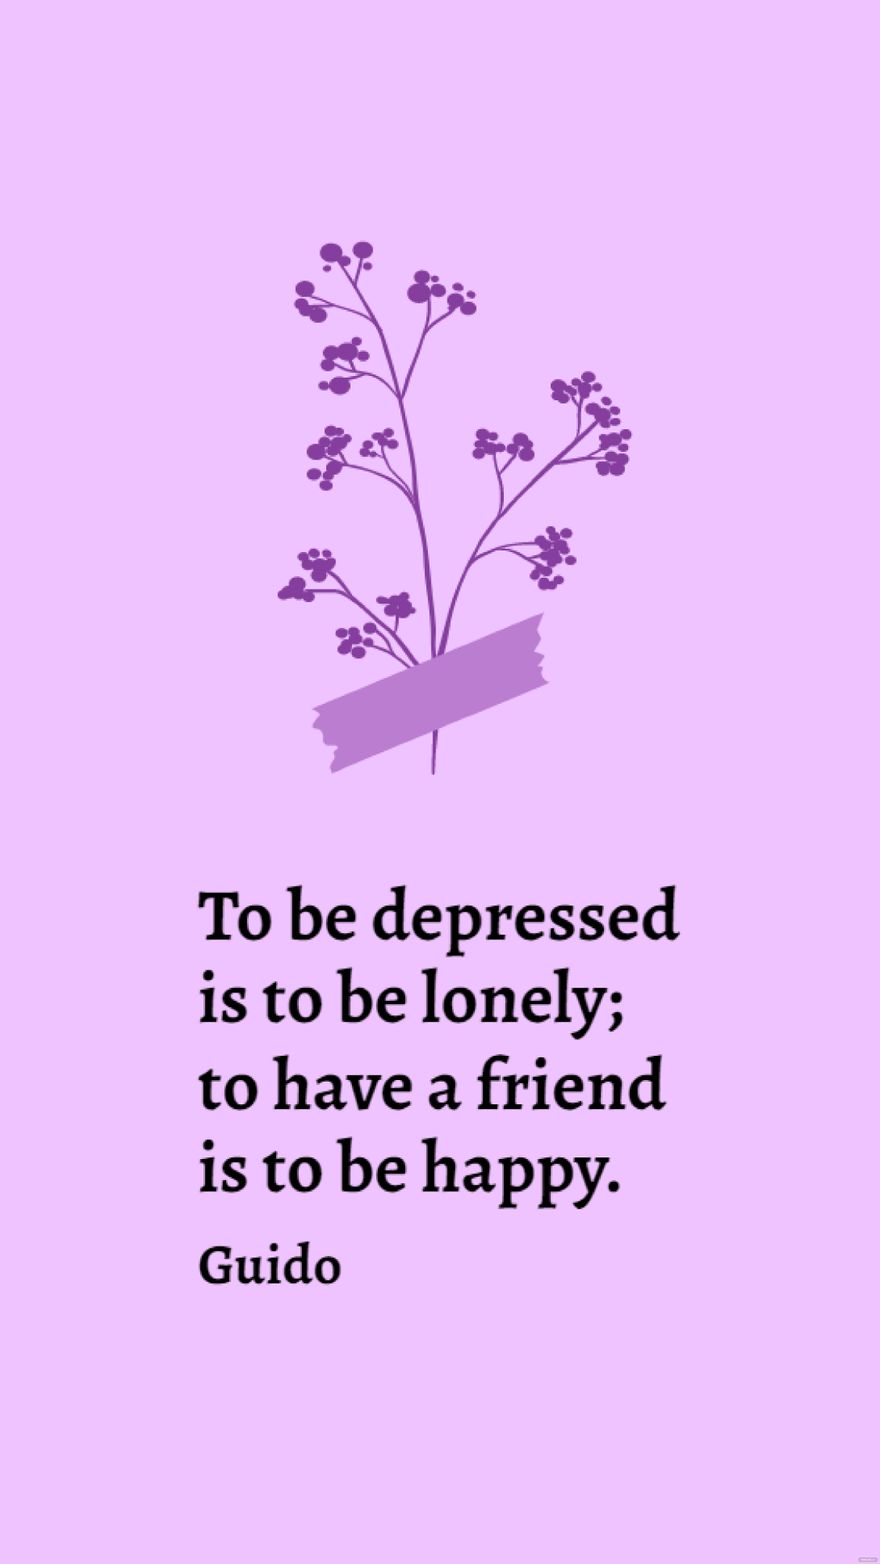 Free Guido - To be depressed is to be lonely; to have a friend is to be happy. in JPG